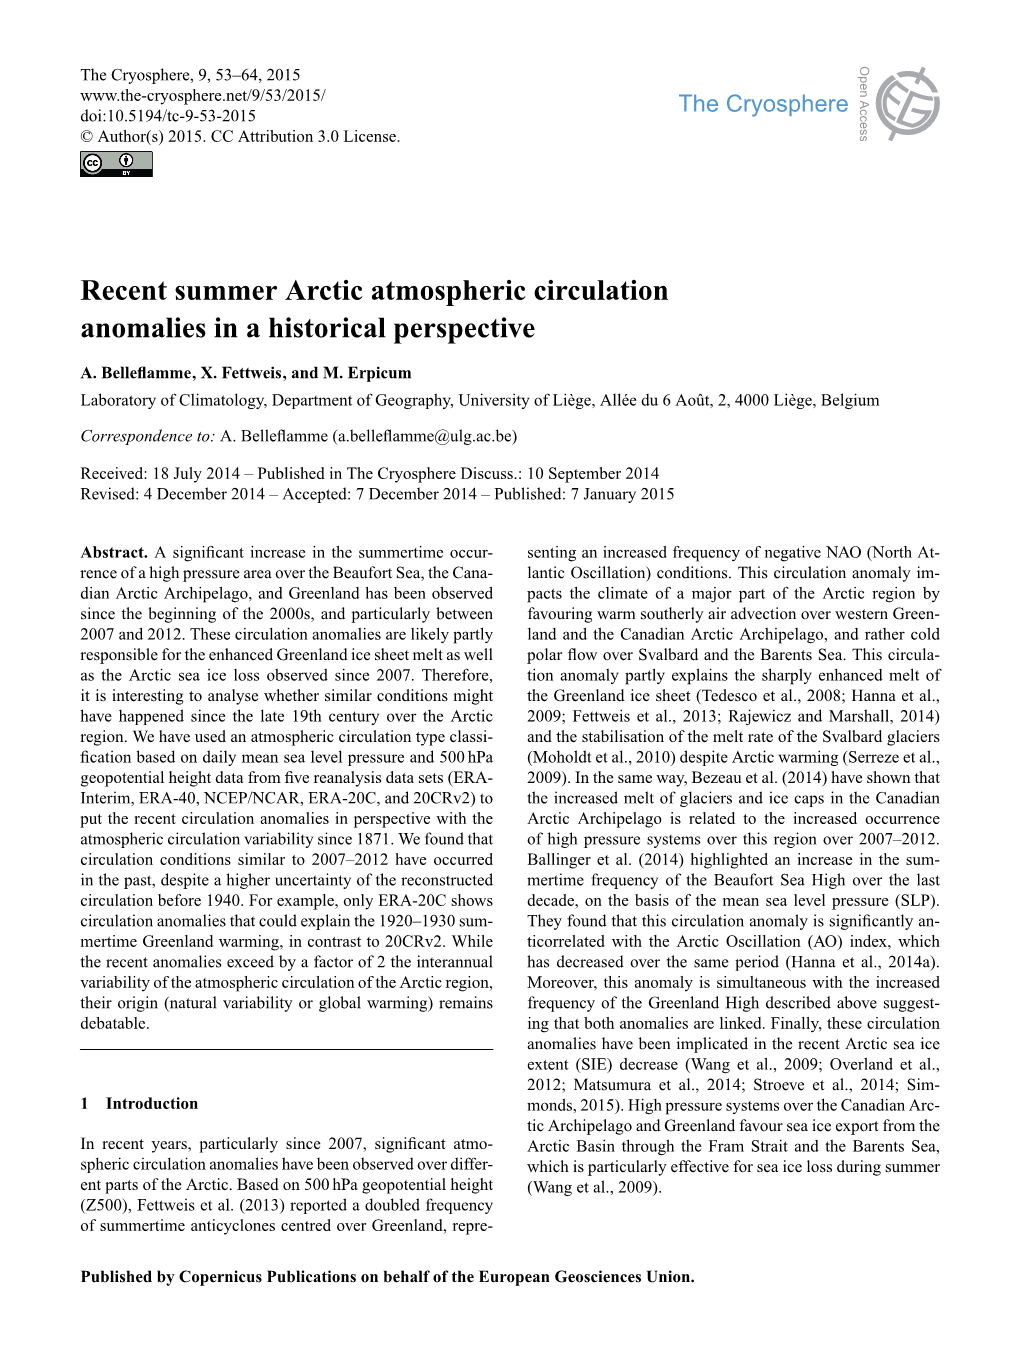 Recent Summer Arctic Atmospheric Circulation Anomalies in a Historical Perspective